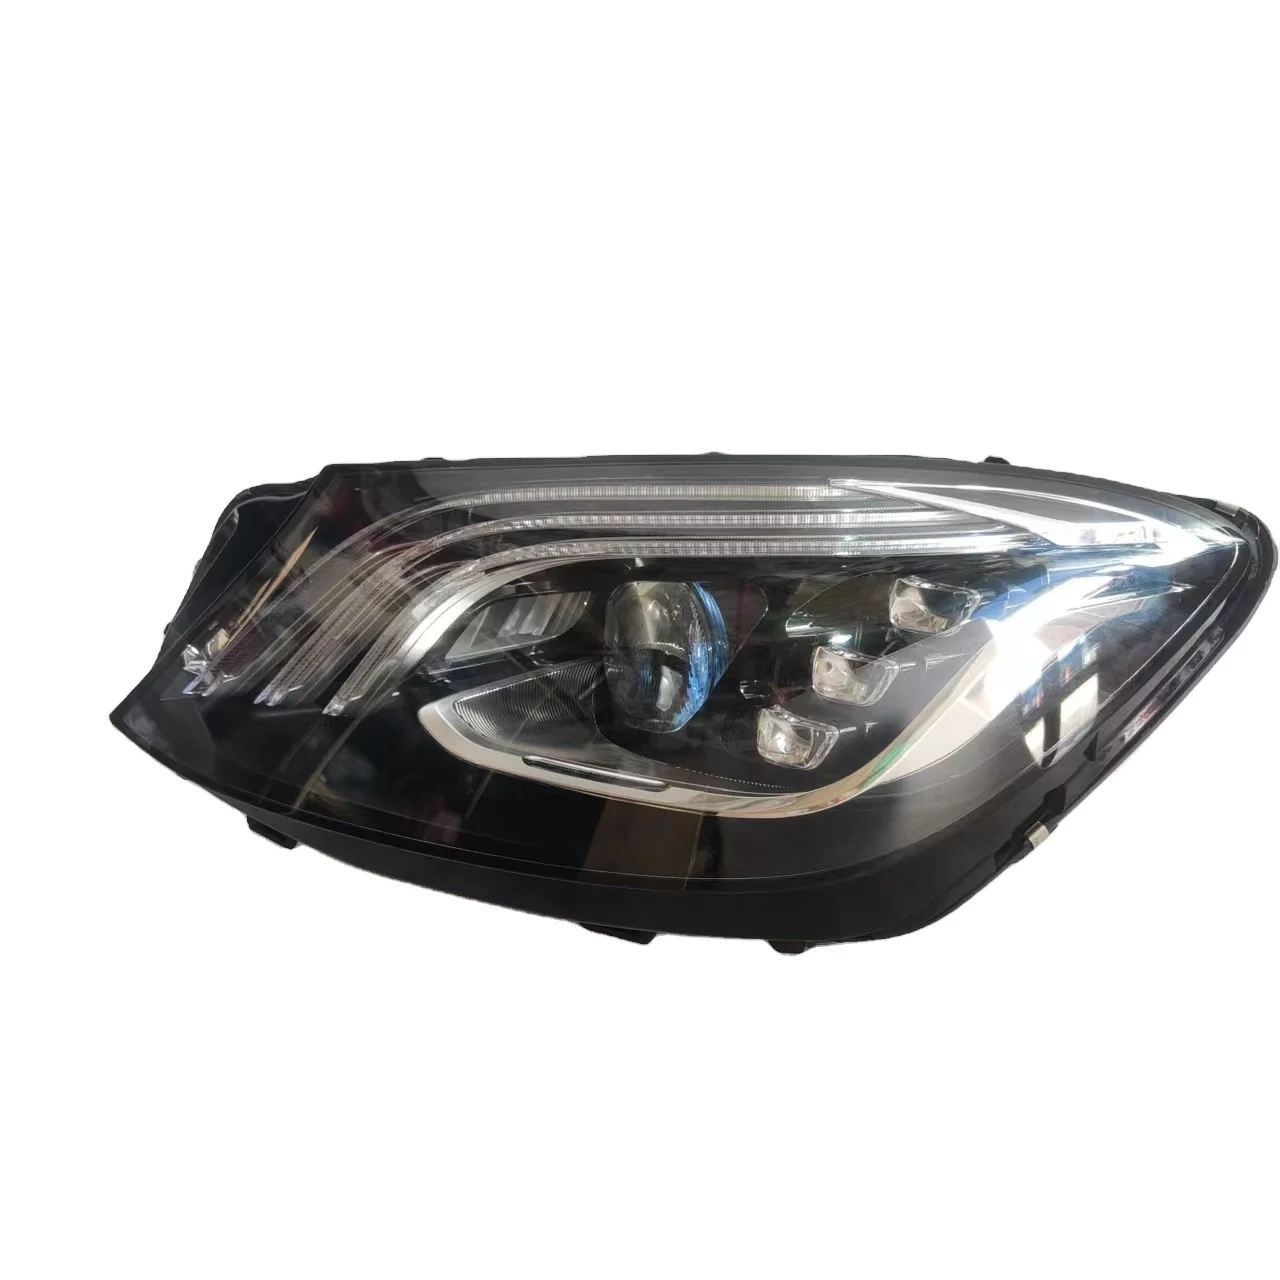 

For Mercedes Benz new S-class 222 car lights led headlight Factory direct sales of new remanufactured car headlight